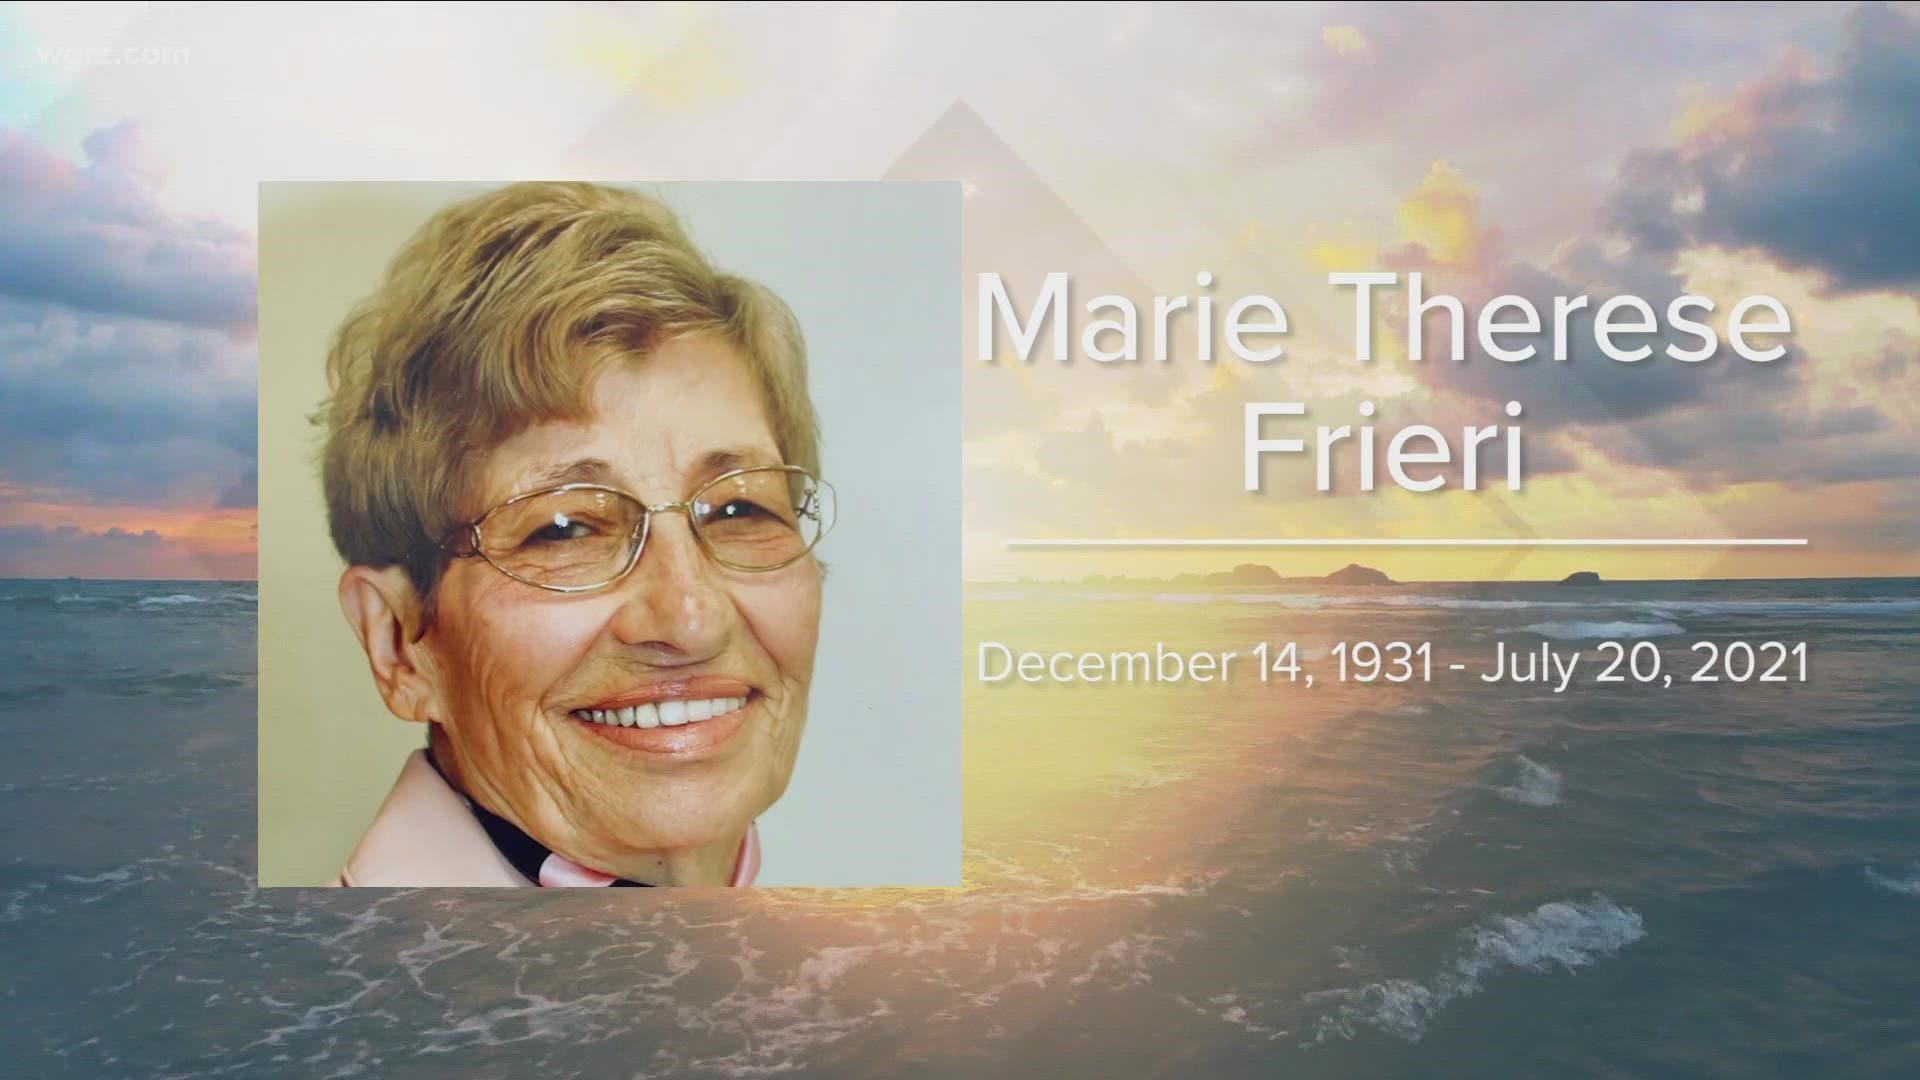 Maria Theresa Frieri was an educator, advocate, wife, mother, mentor and friend. She wove all of those into the fabric of a Life Well Lived.